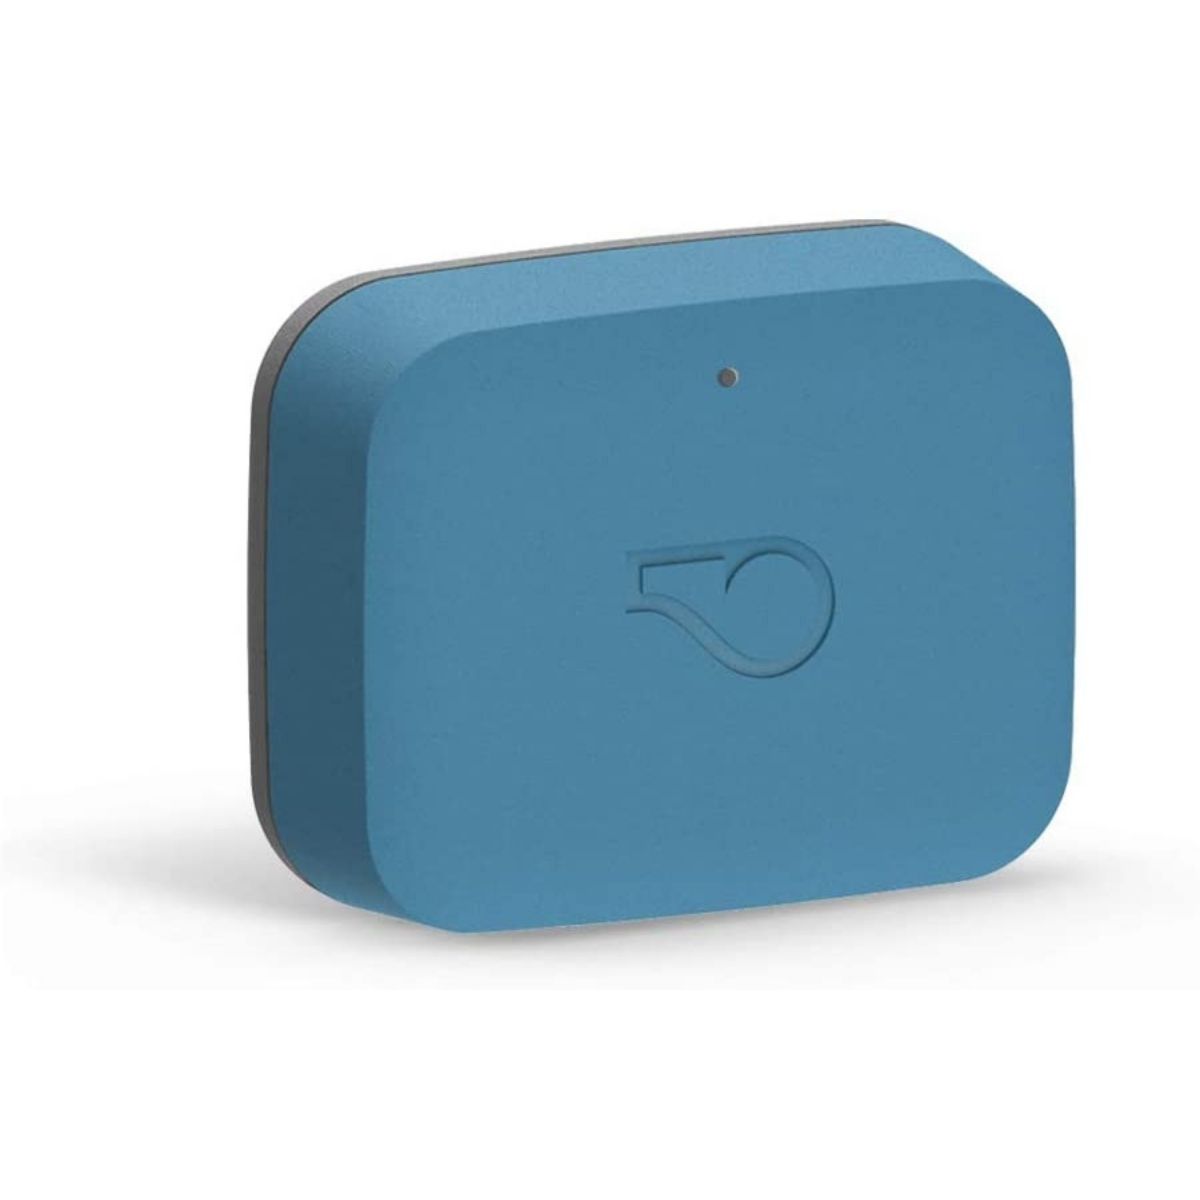 Whistle Go - Health u0026 Location Tracker for Pets